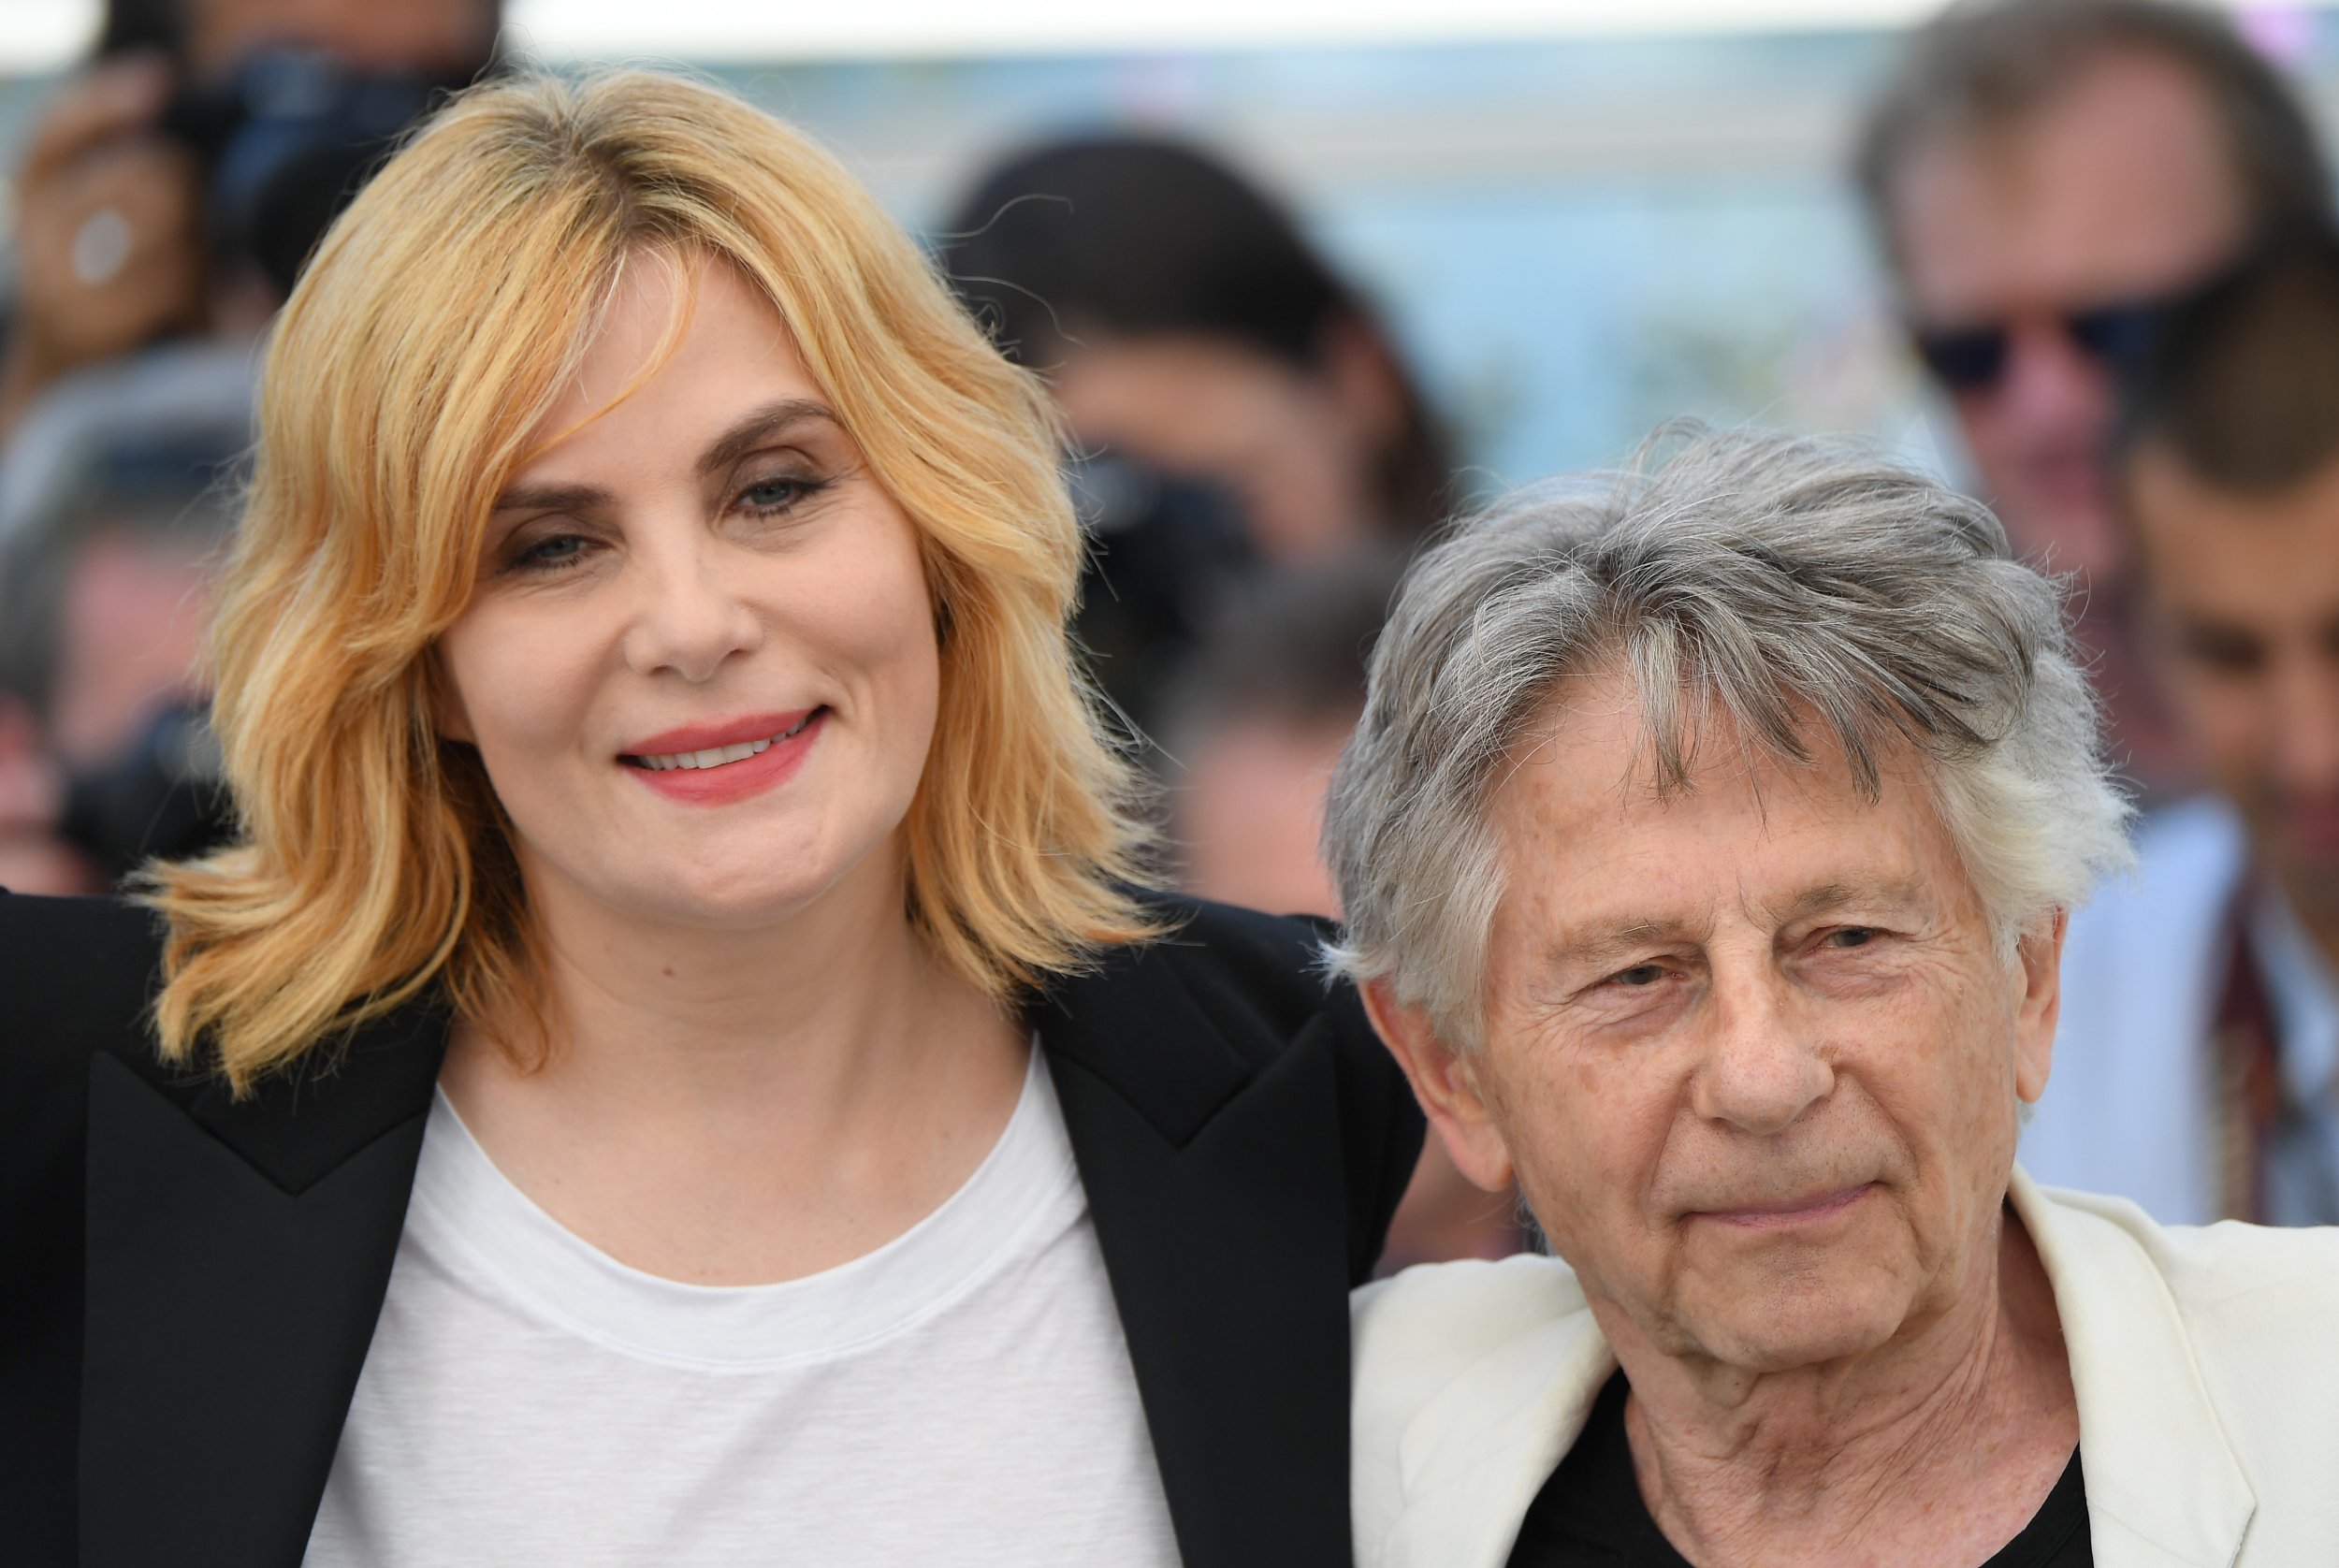 Director Roman Polanski and actress Emmanuelle Seigner attend the "Based On A True Story" photocall during the 70th annual Cannes Film Festival at Palais des Festivals on May 27, 2017 in Cannes, France.